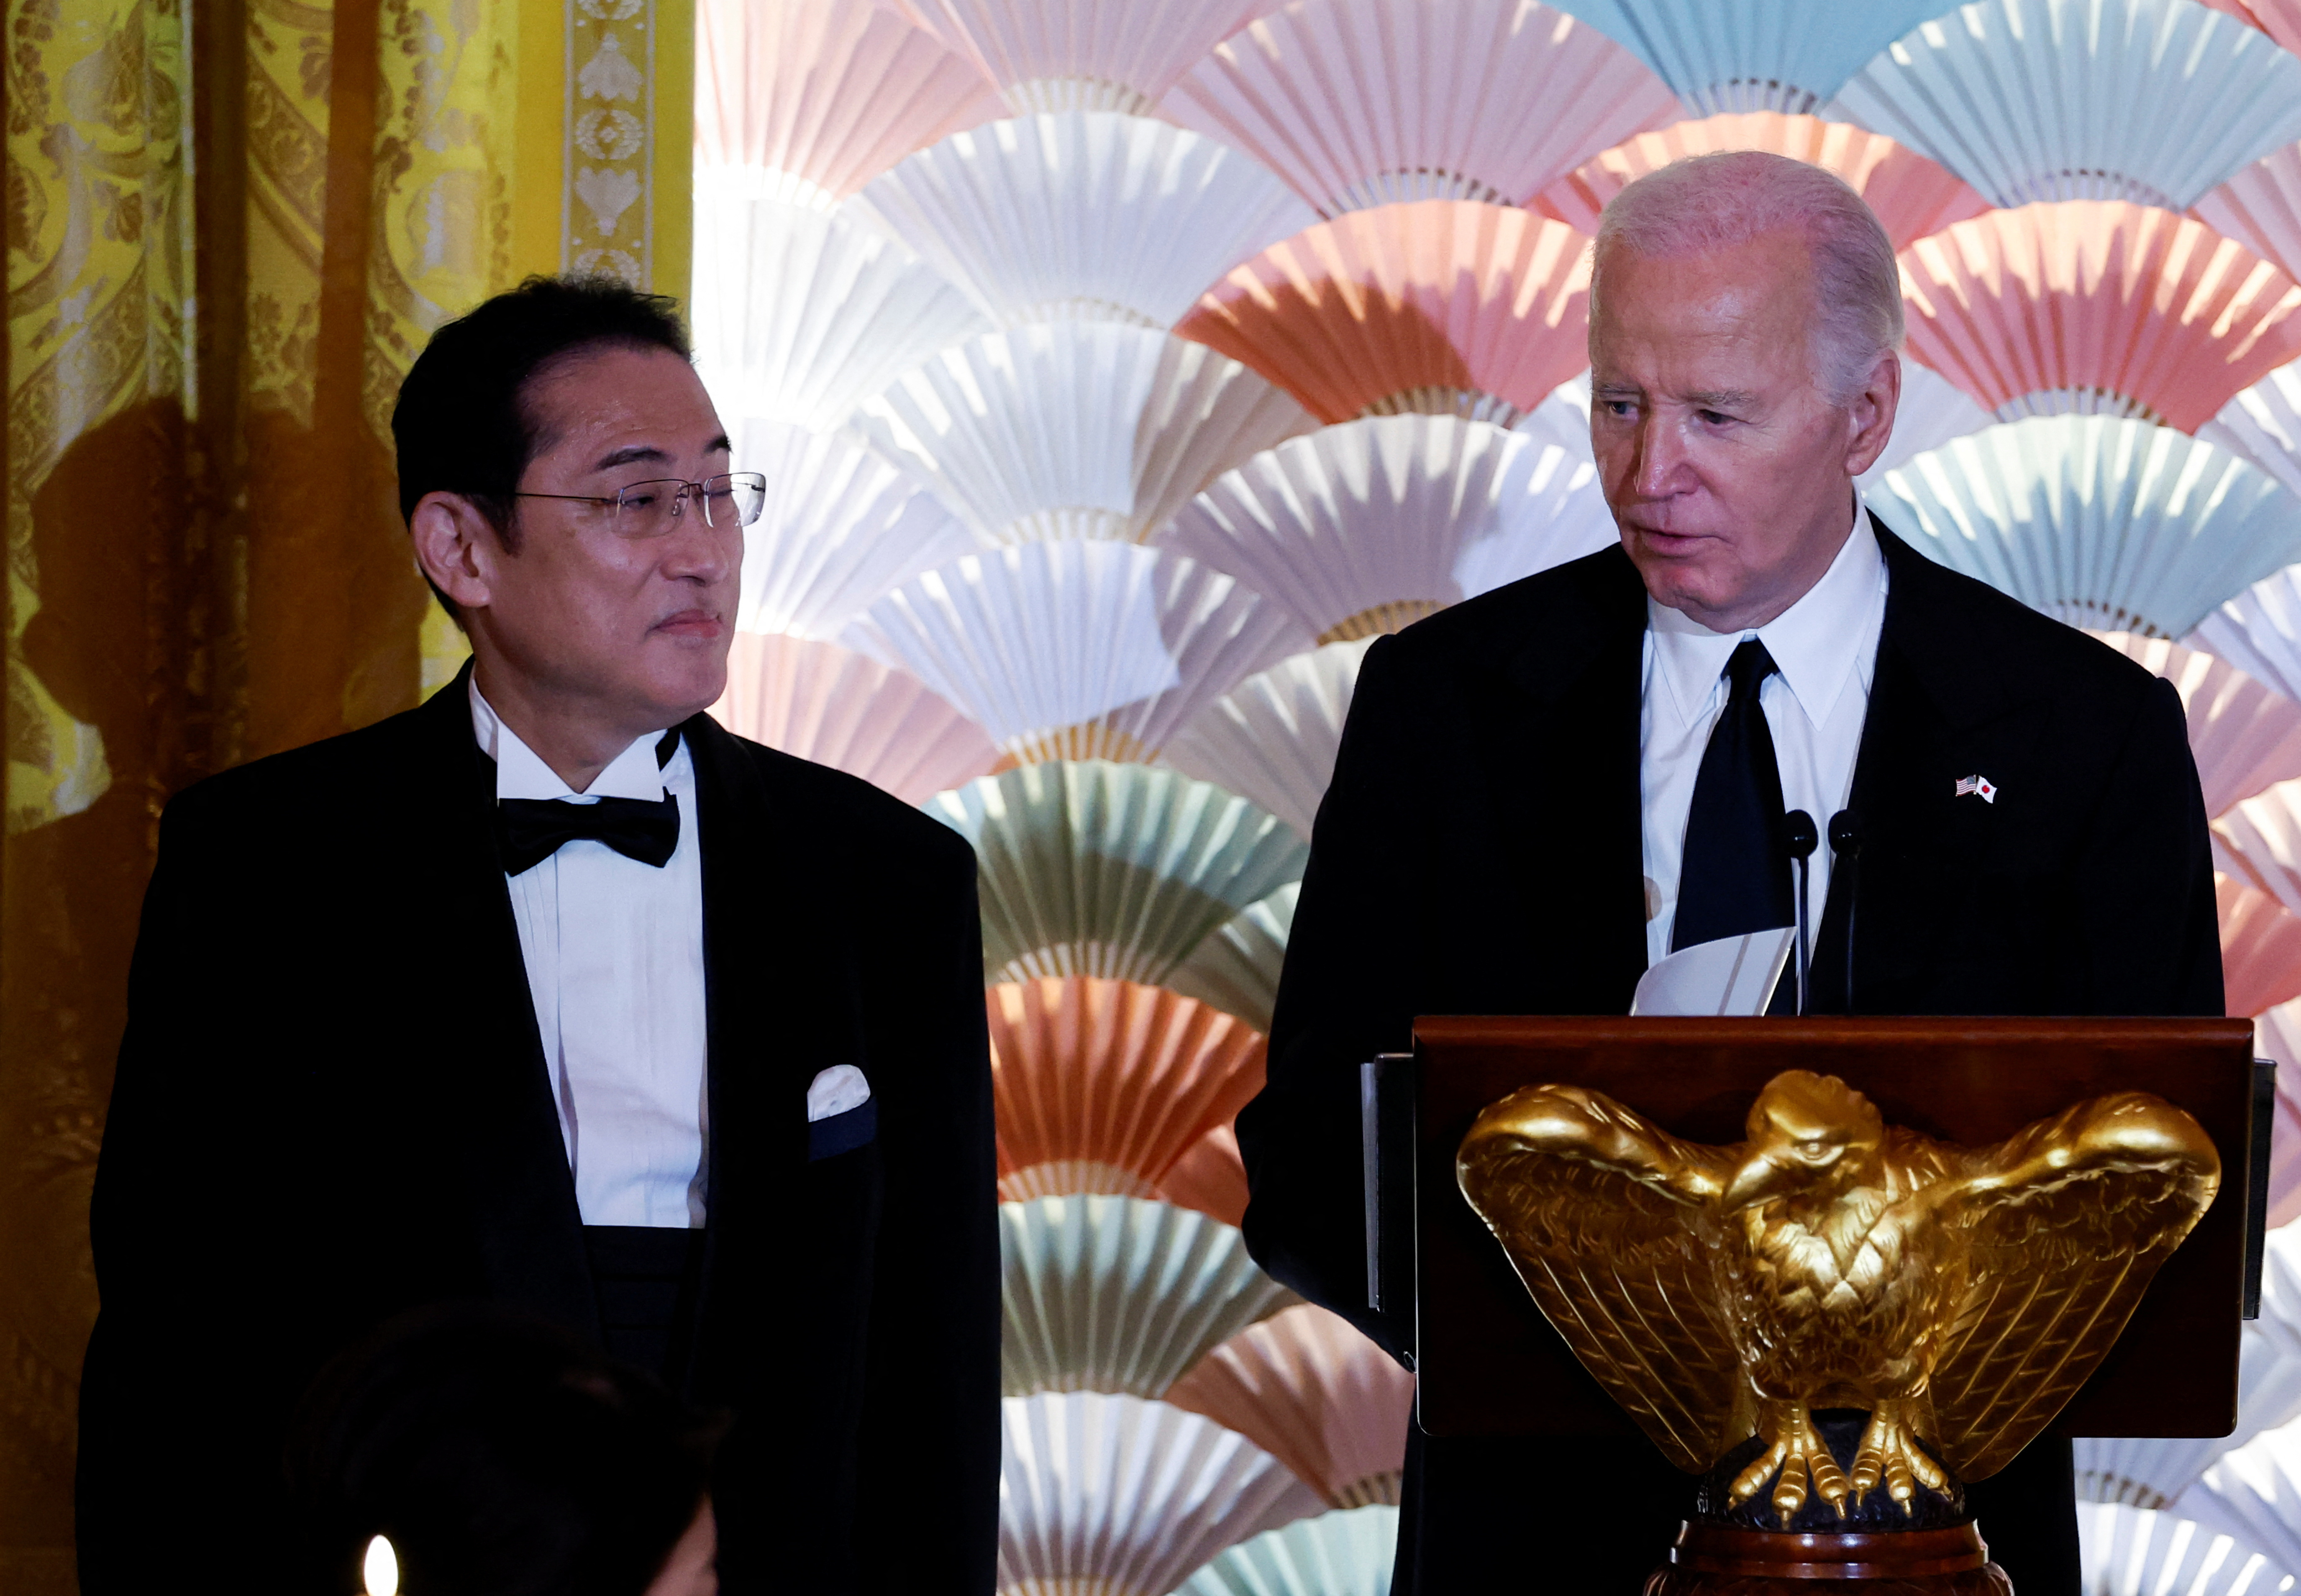 U.S. President Biden hosts Japan's PM Fumio Kishida for an official State Dinner at the White House in Washington